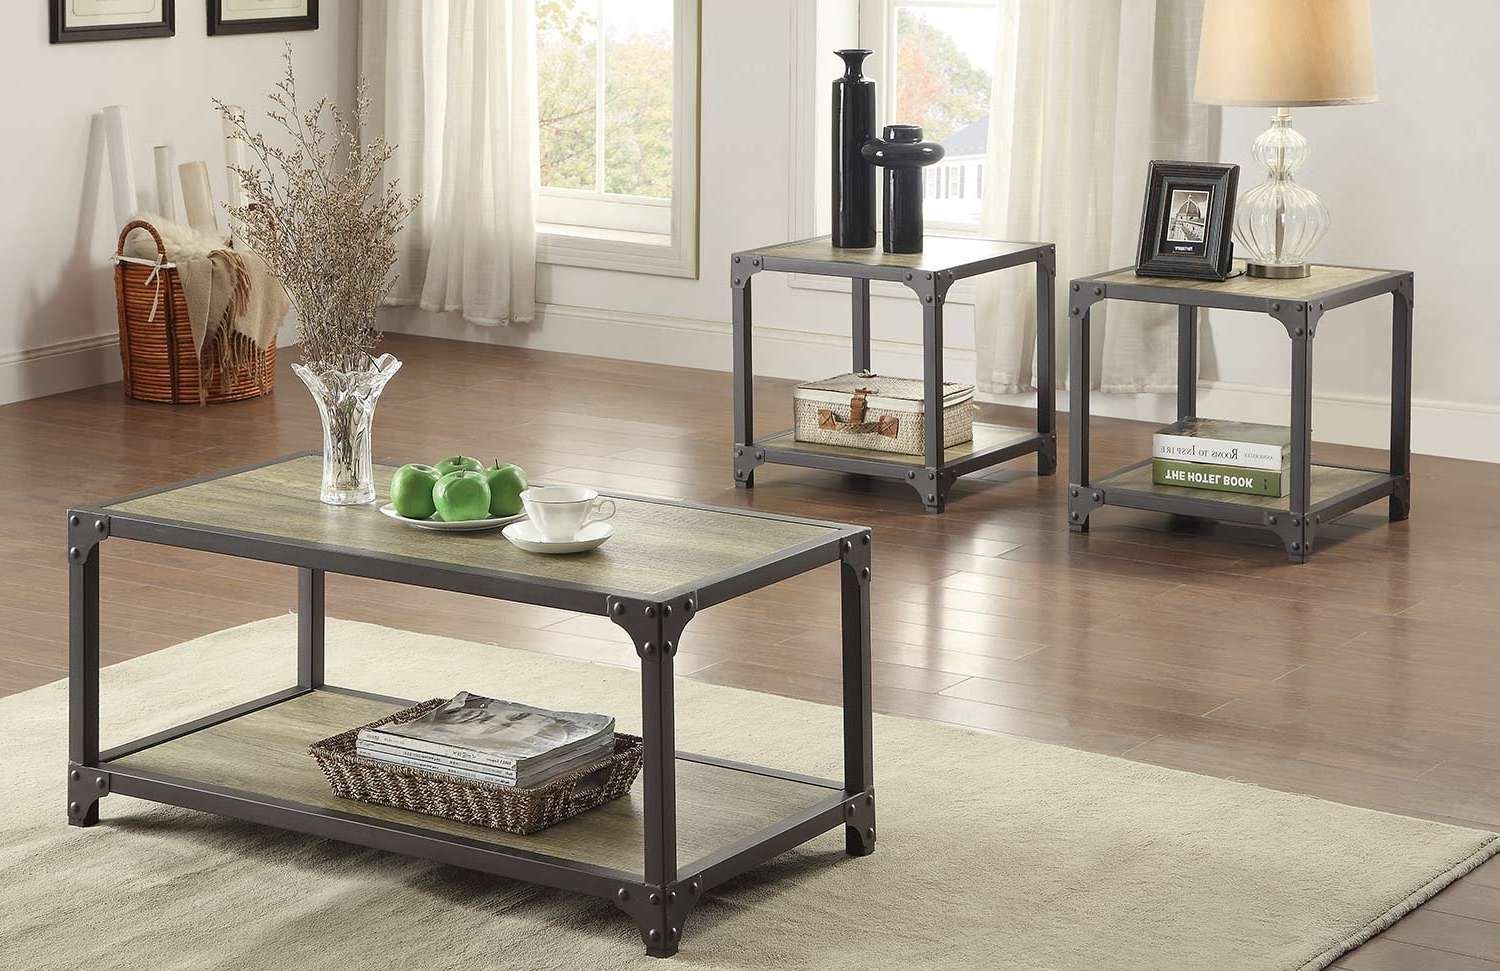 Homelegance Rumi Coffee Table Set – Light Burnished Wood With Inside Widely Used Tv Stand Coffee Table Sets (View 9 of 20)